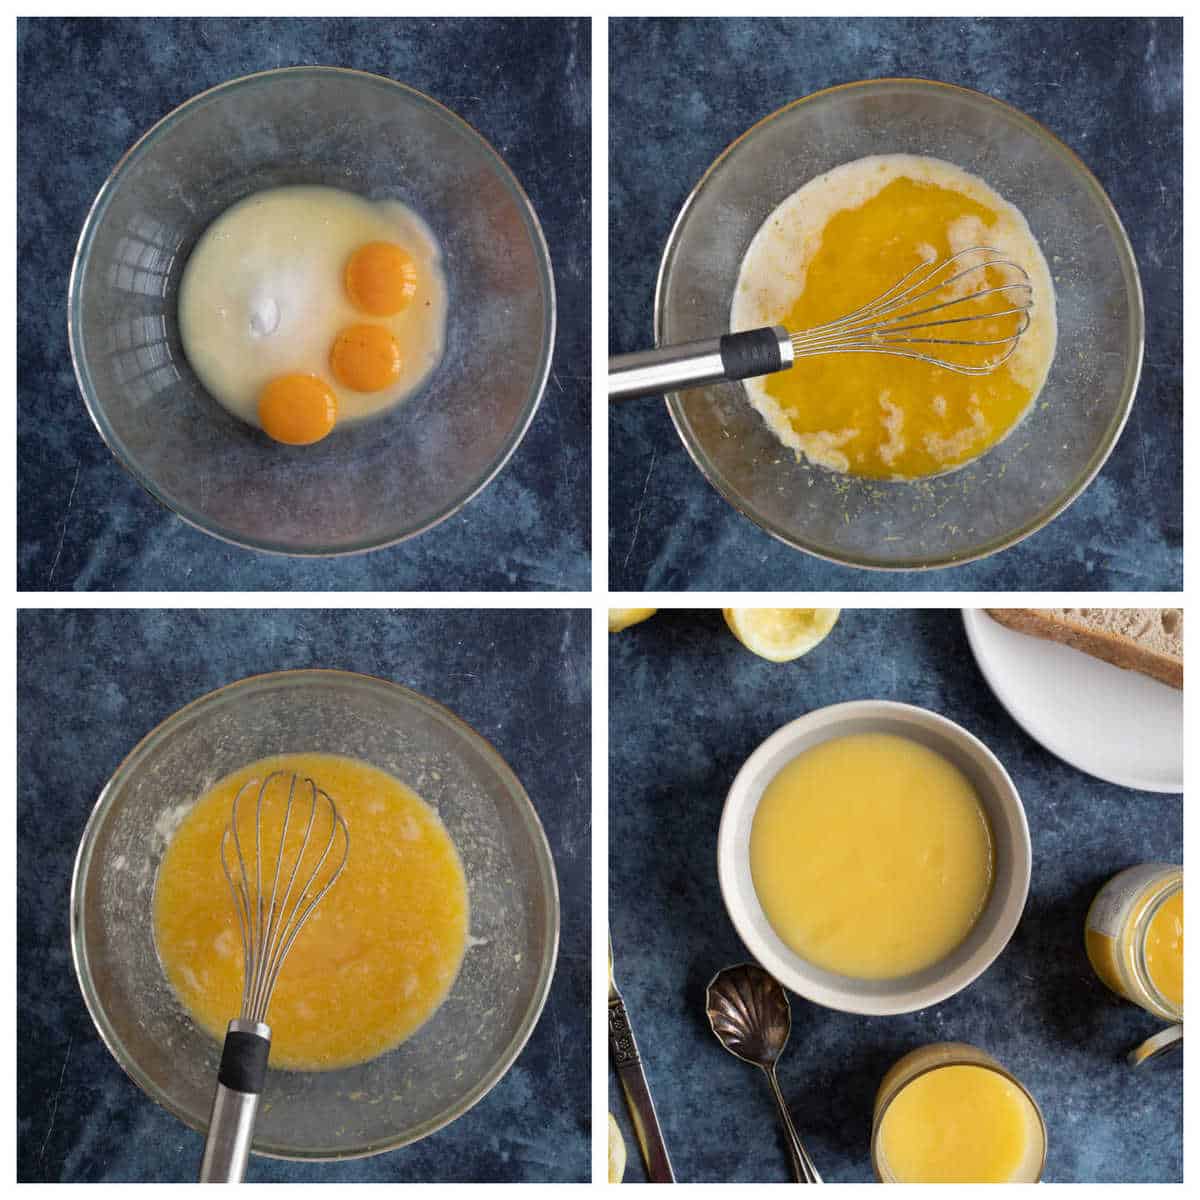 Step by step photo instructions for making lemon curd in the microwave.